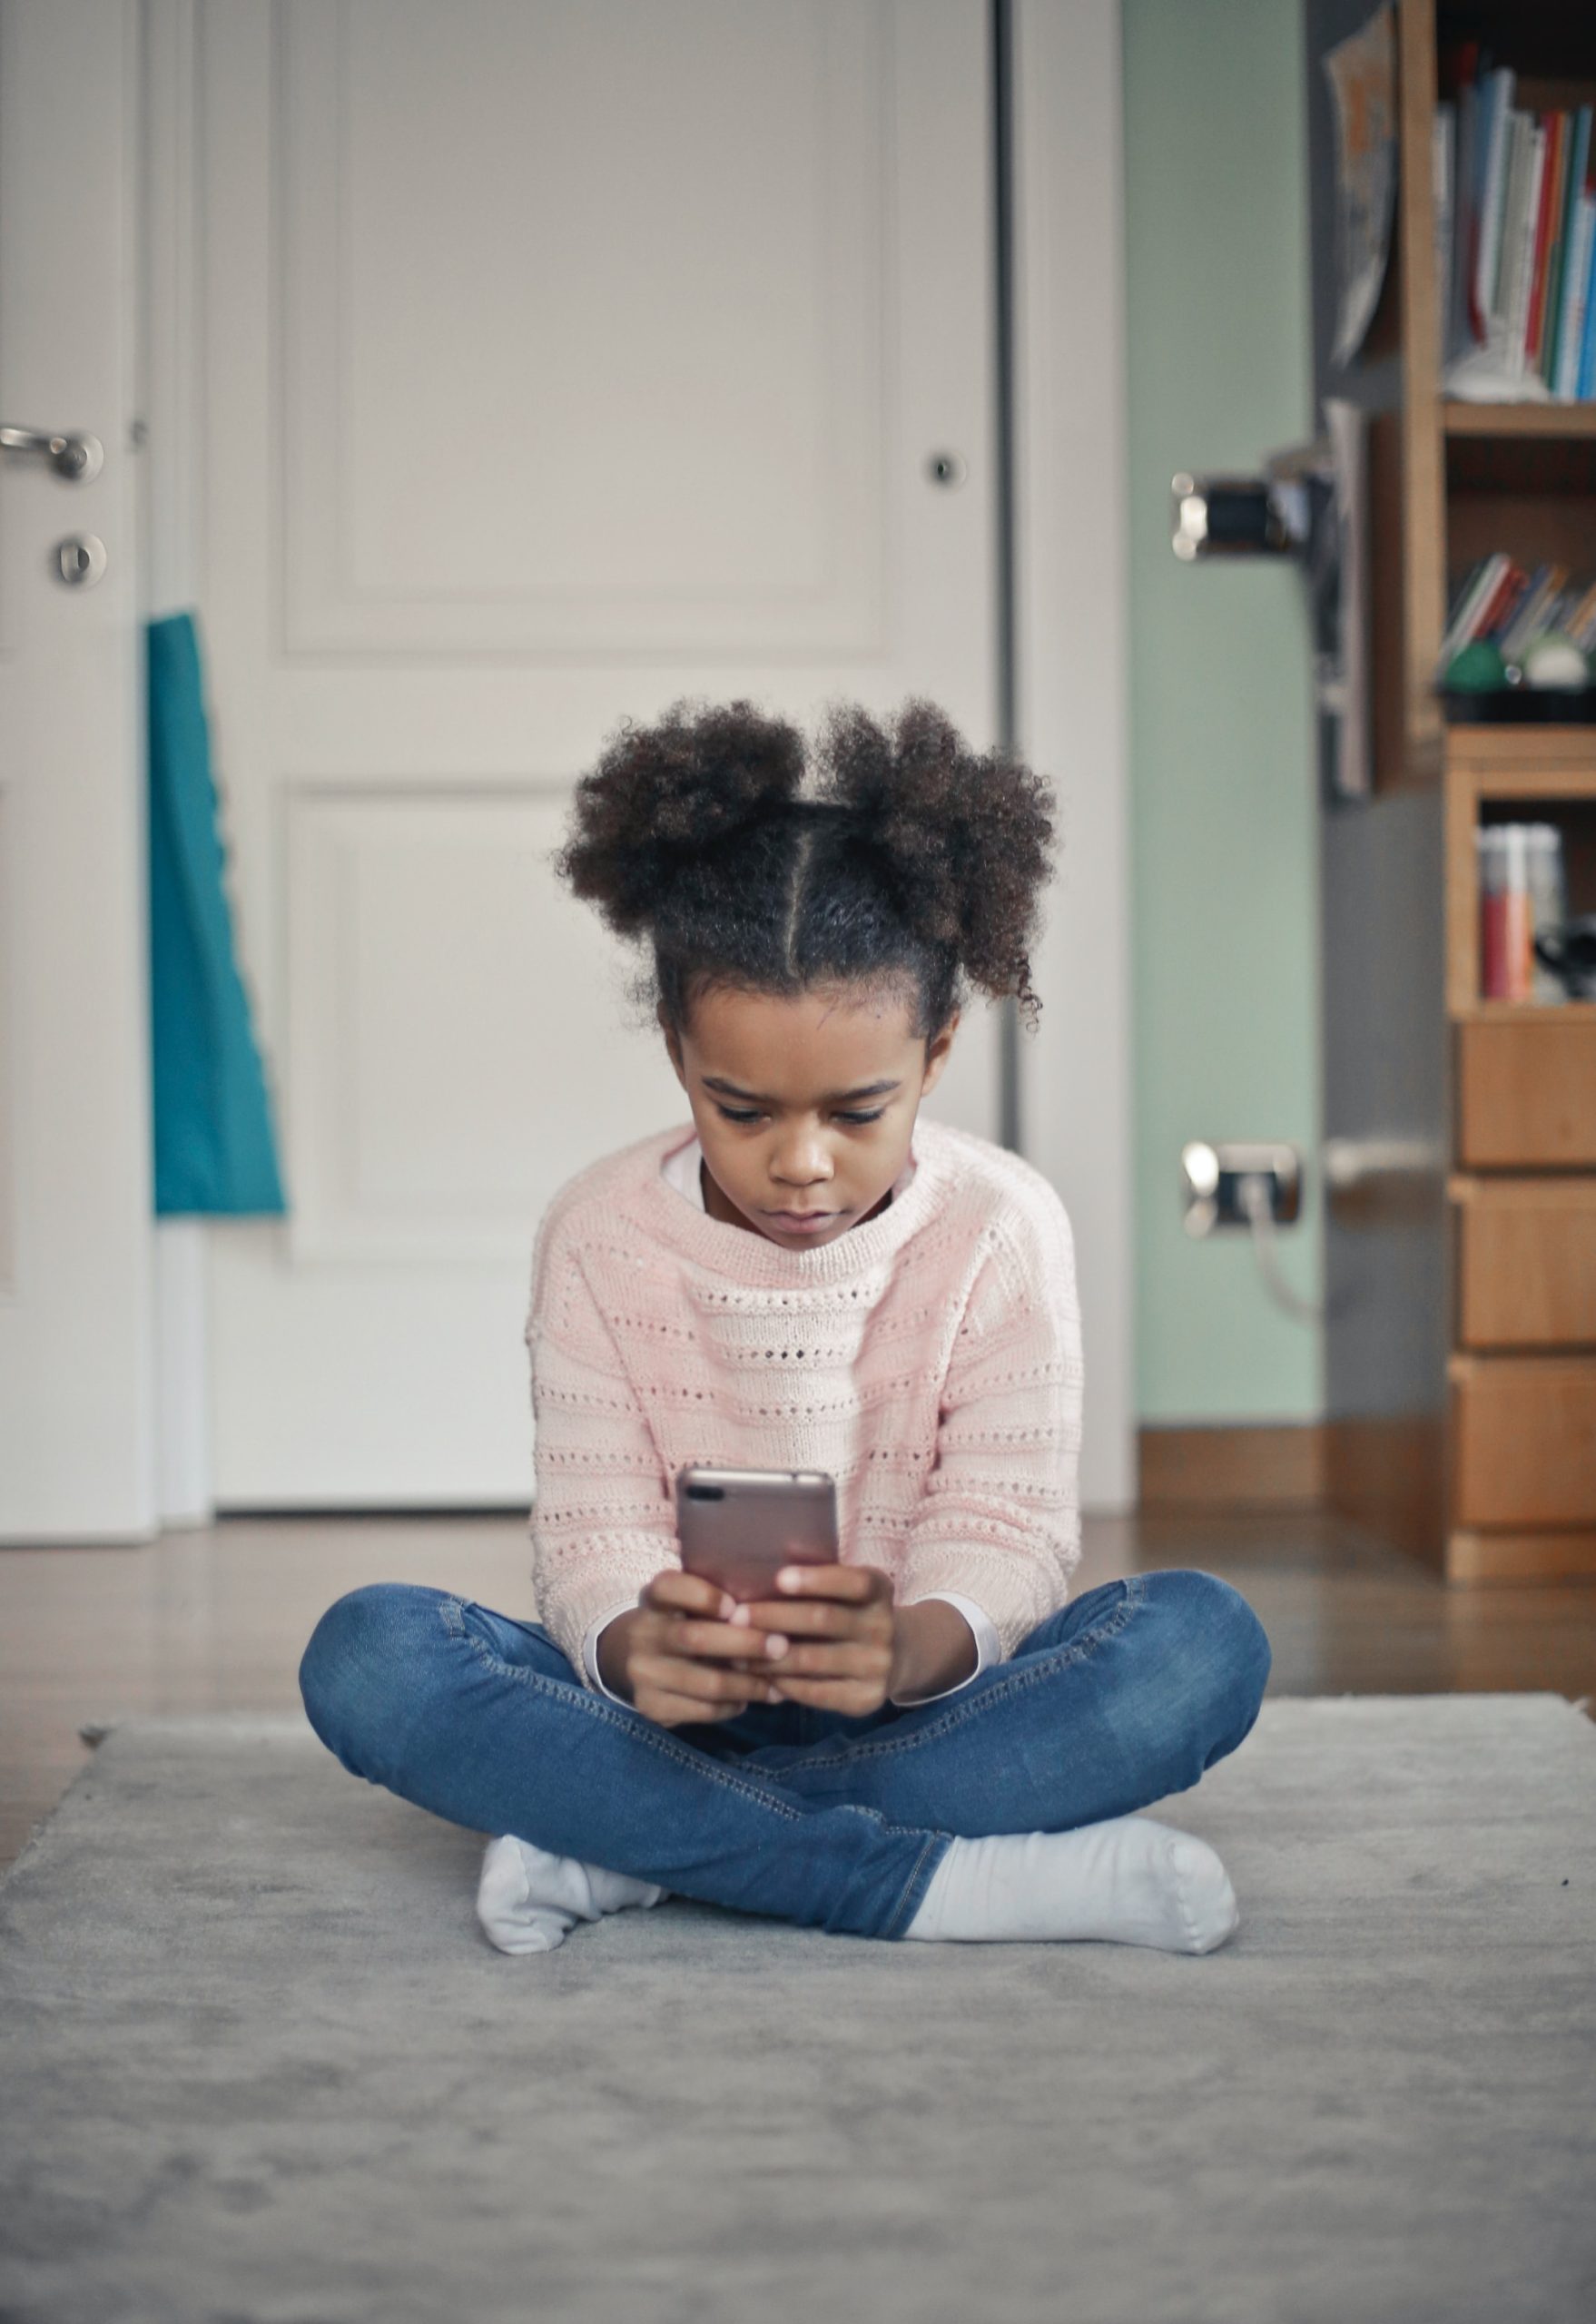 Parental Control Strategies for Screen Time